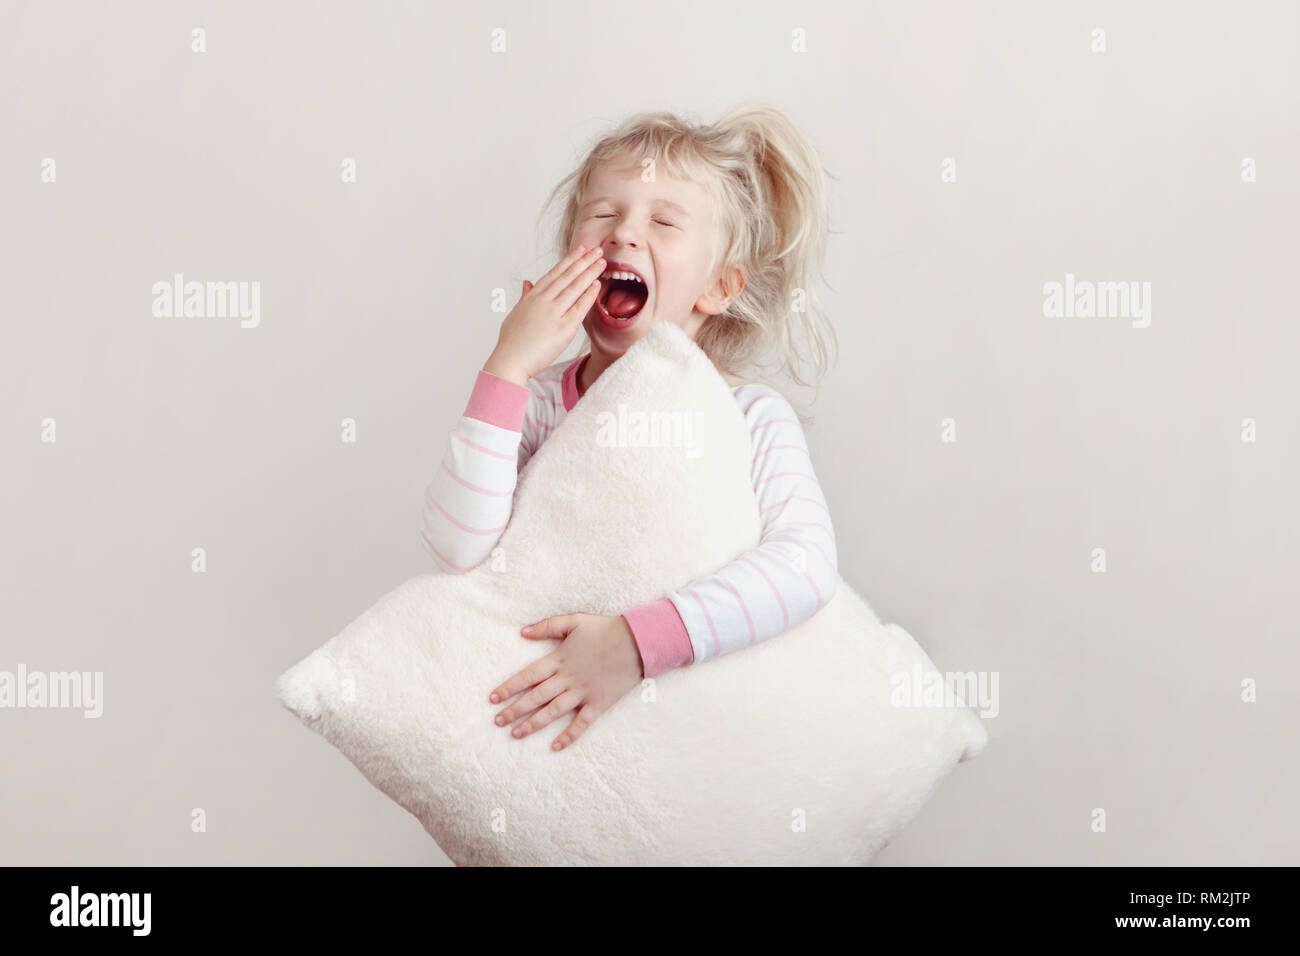 Healthy sleep concept. Cute blonde Caucasian girl child in pink pajamas with closed eyes yawning covering wide open mouth with palm. Sleepy kid with m Stock Photo